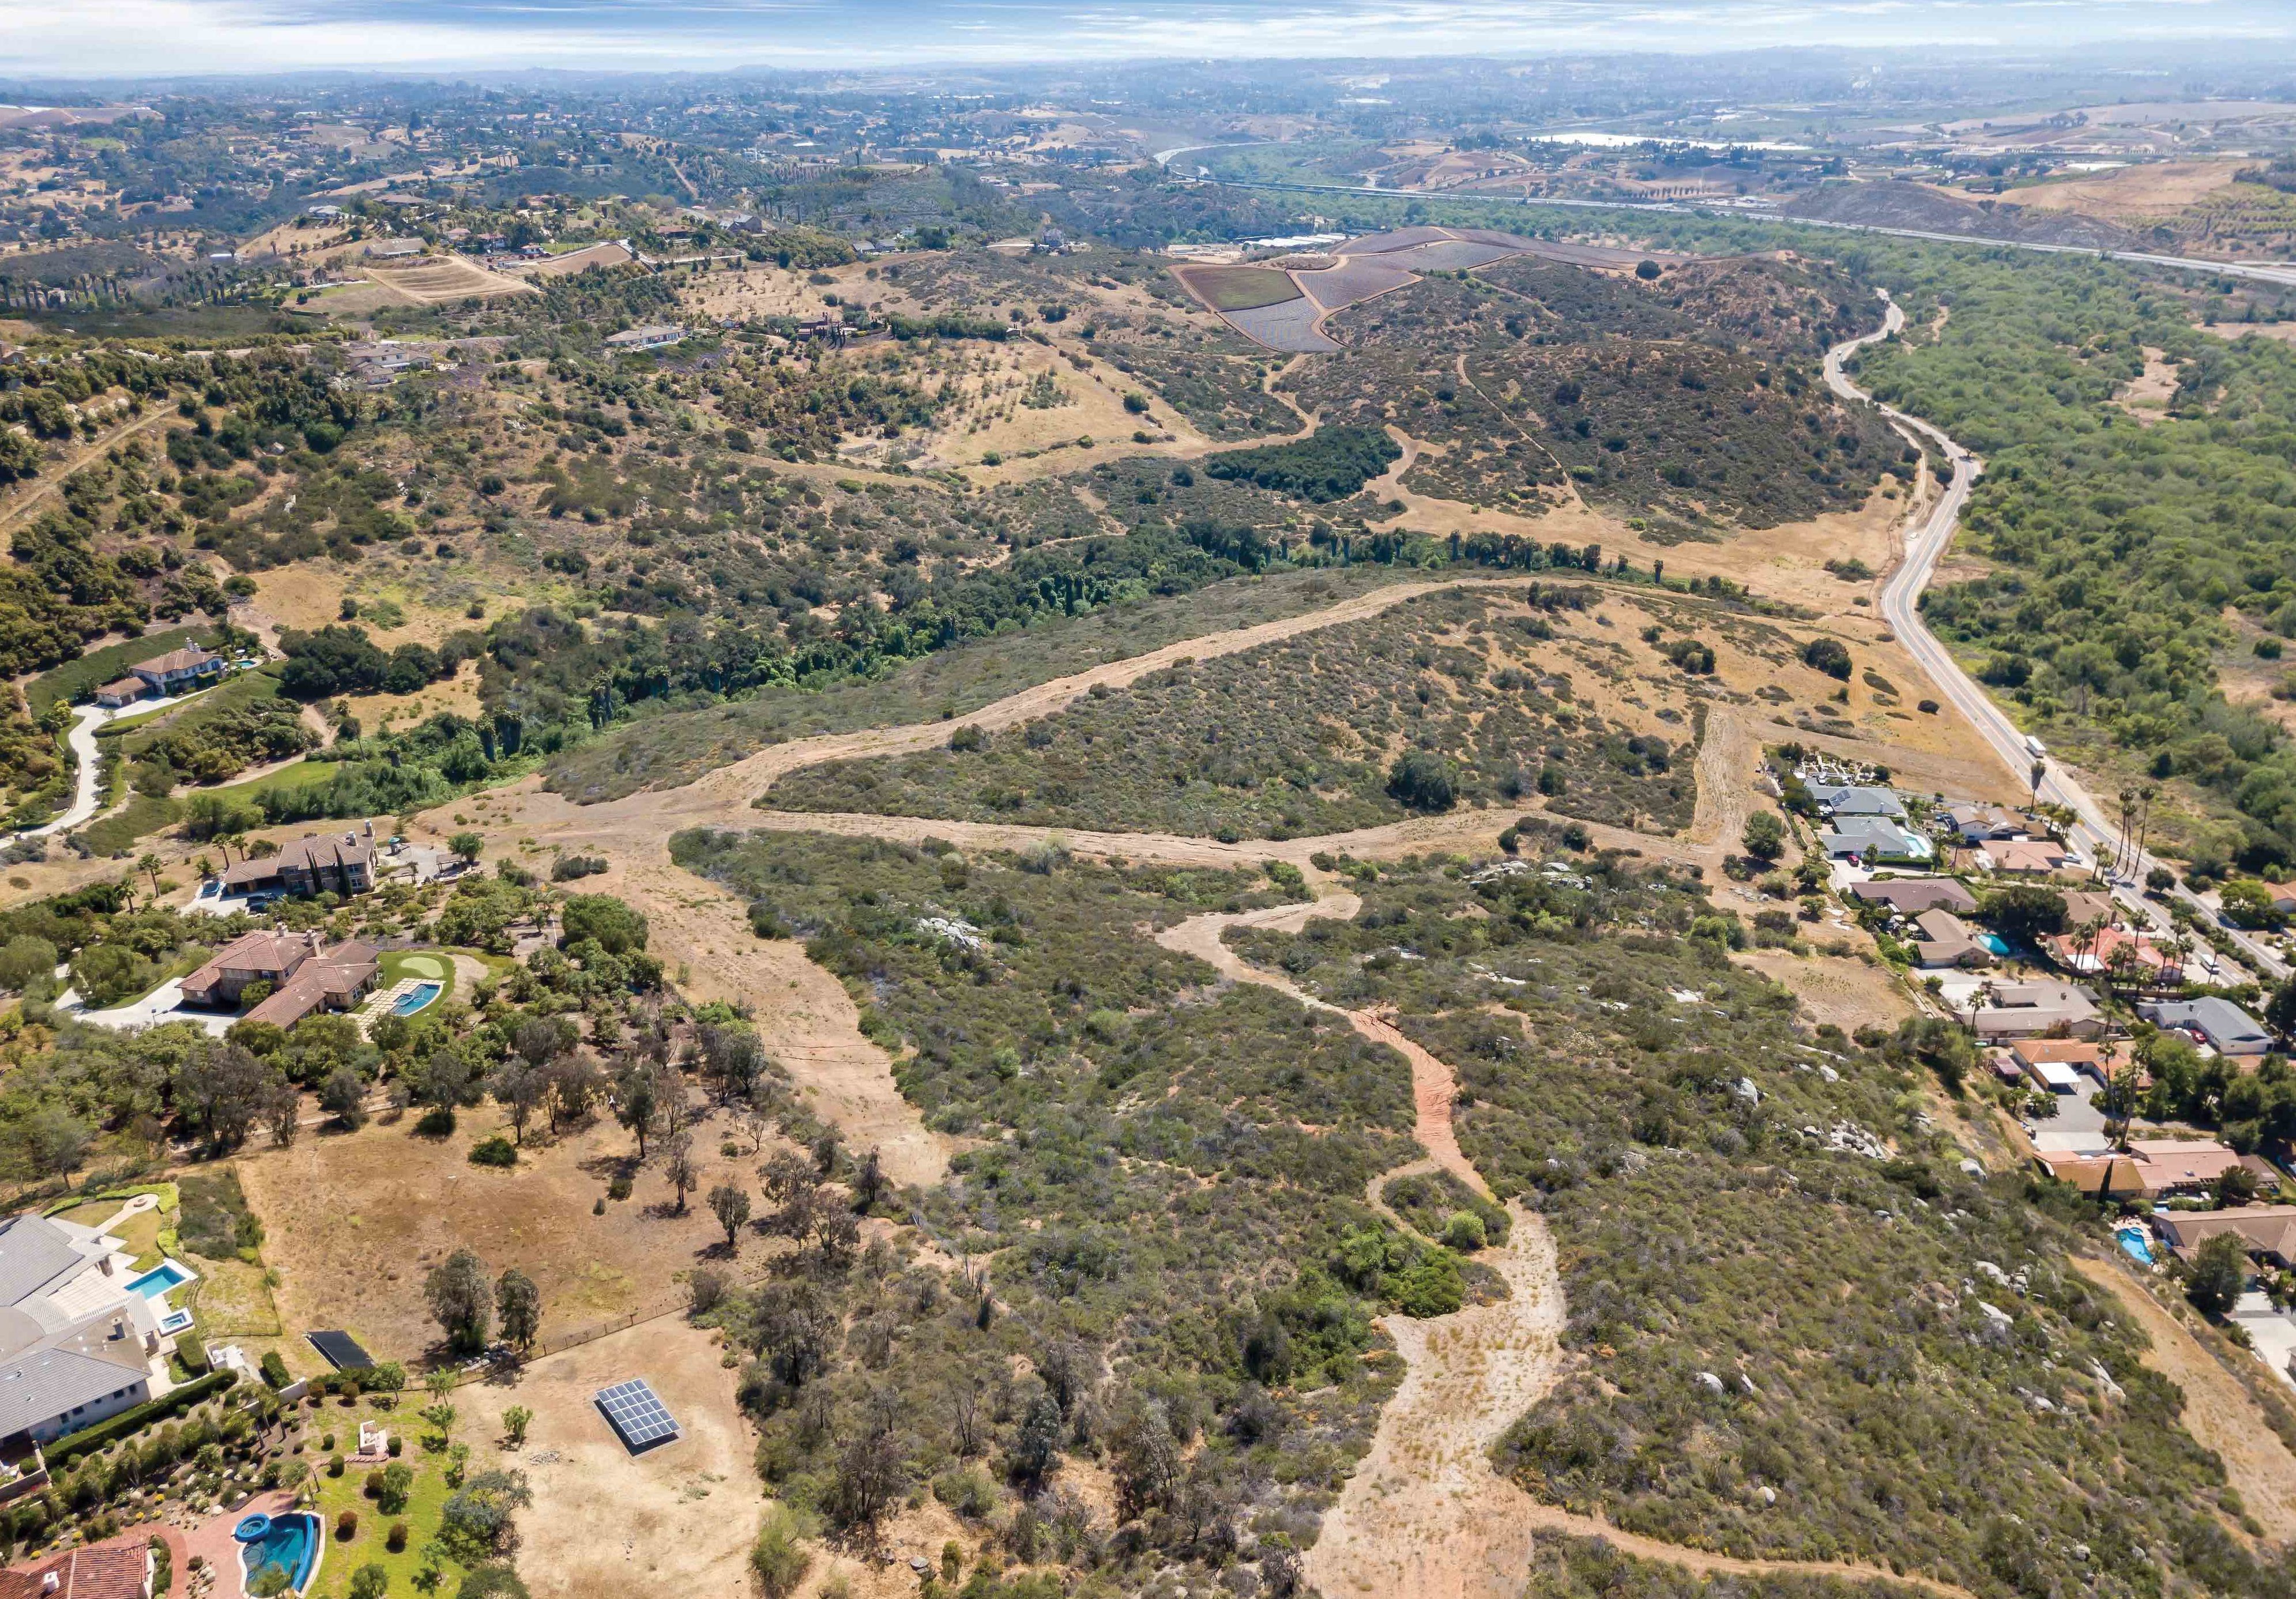 Land for sale Bonsall CA